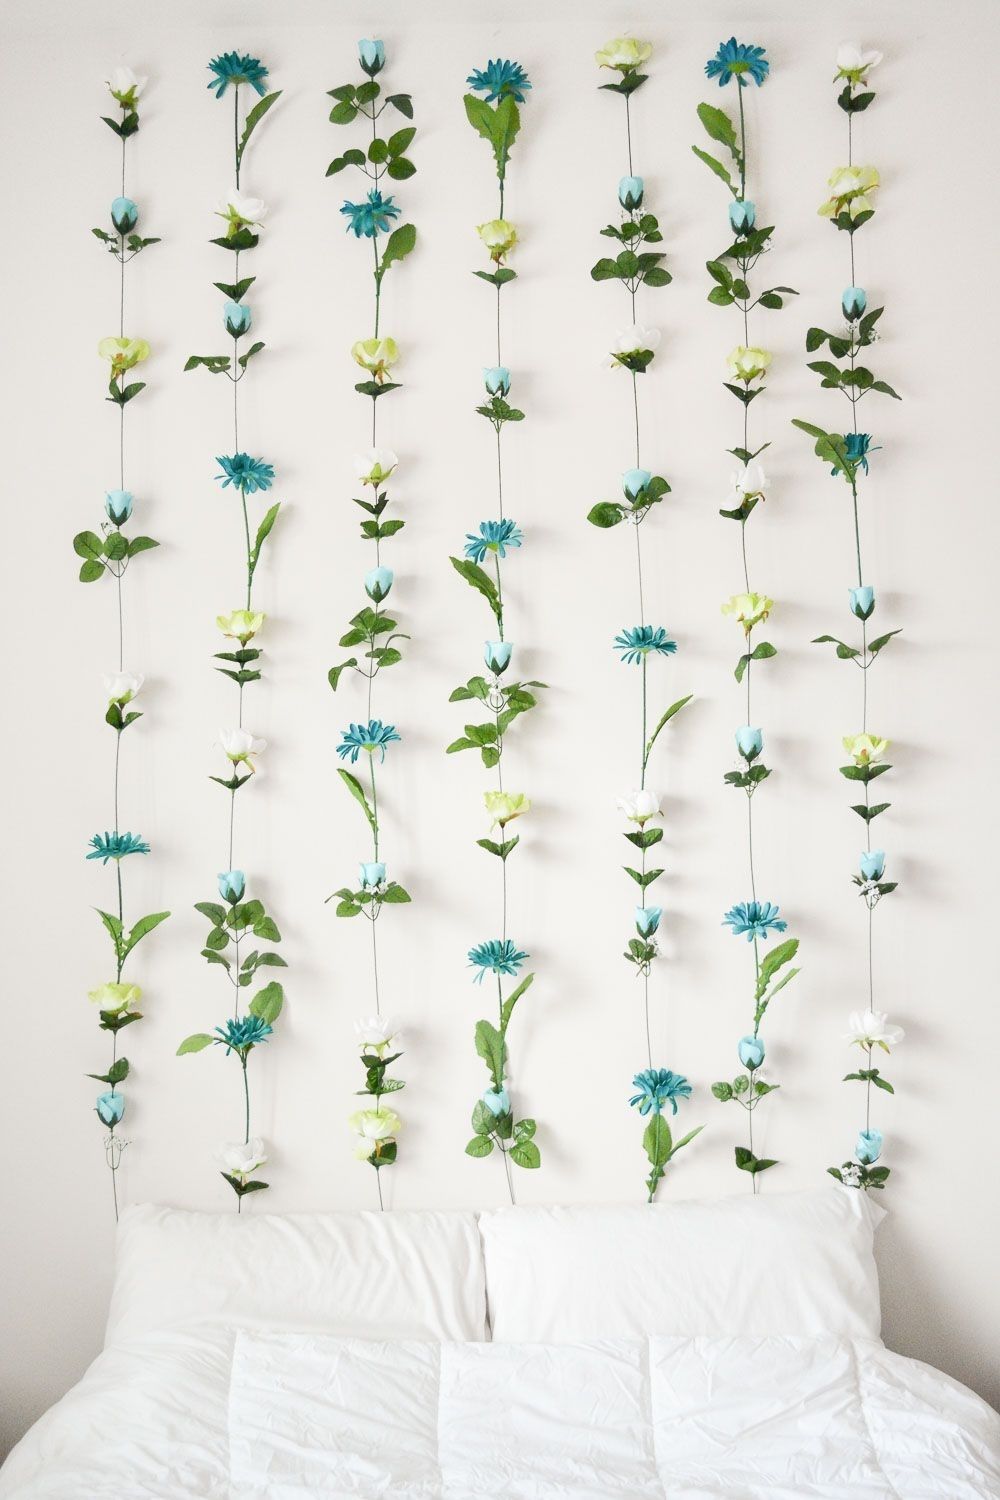 Diy Flower Wall // Headboard // Home Decor | Wall Headboard, Diy In Recent Flowers Wall Accents (View 13 of 15)